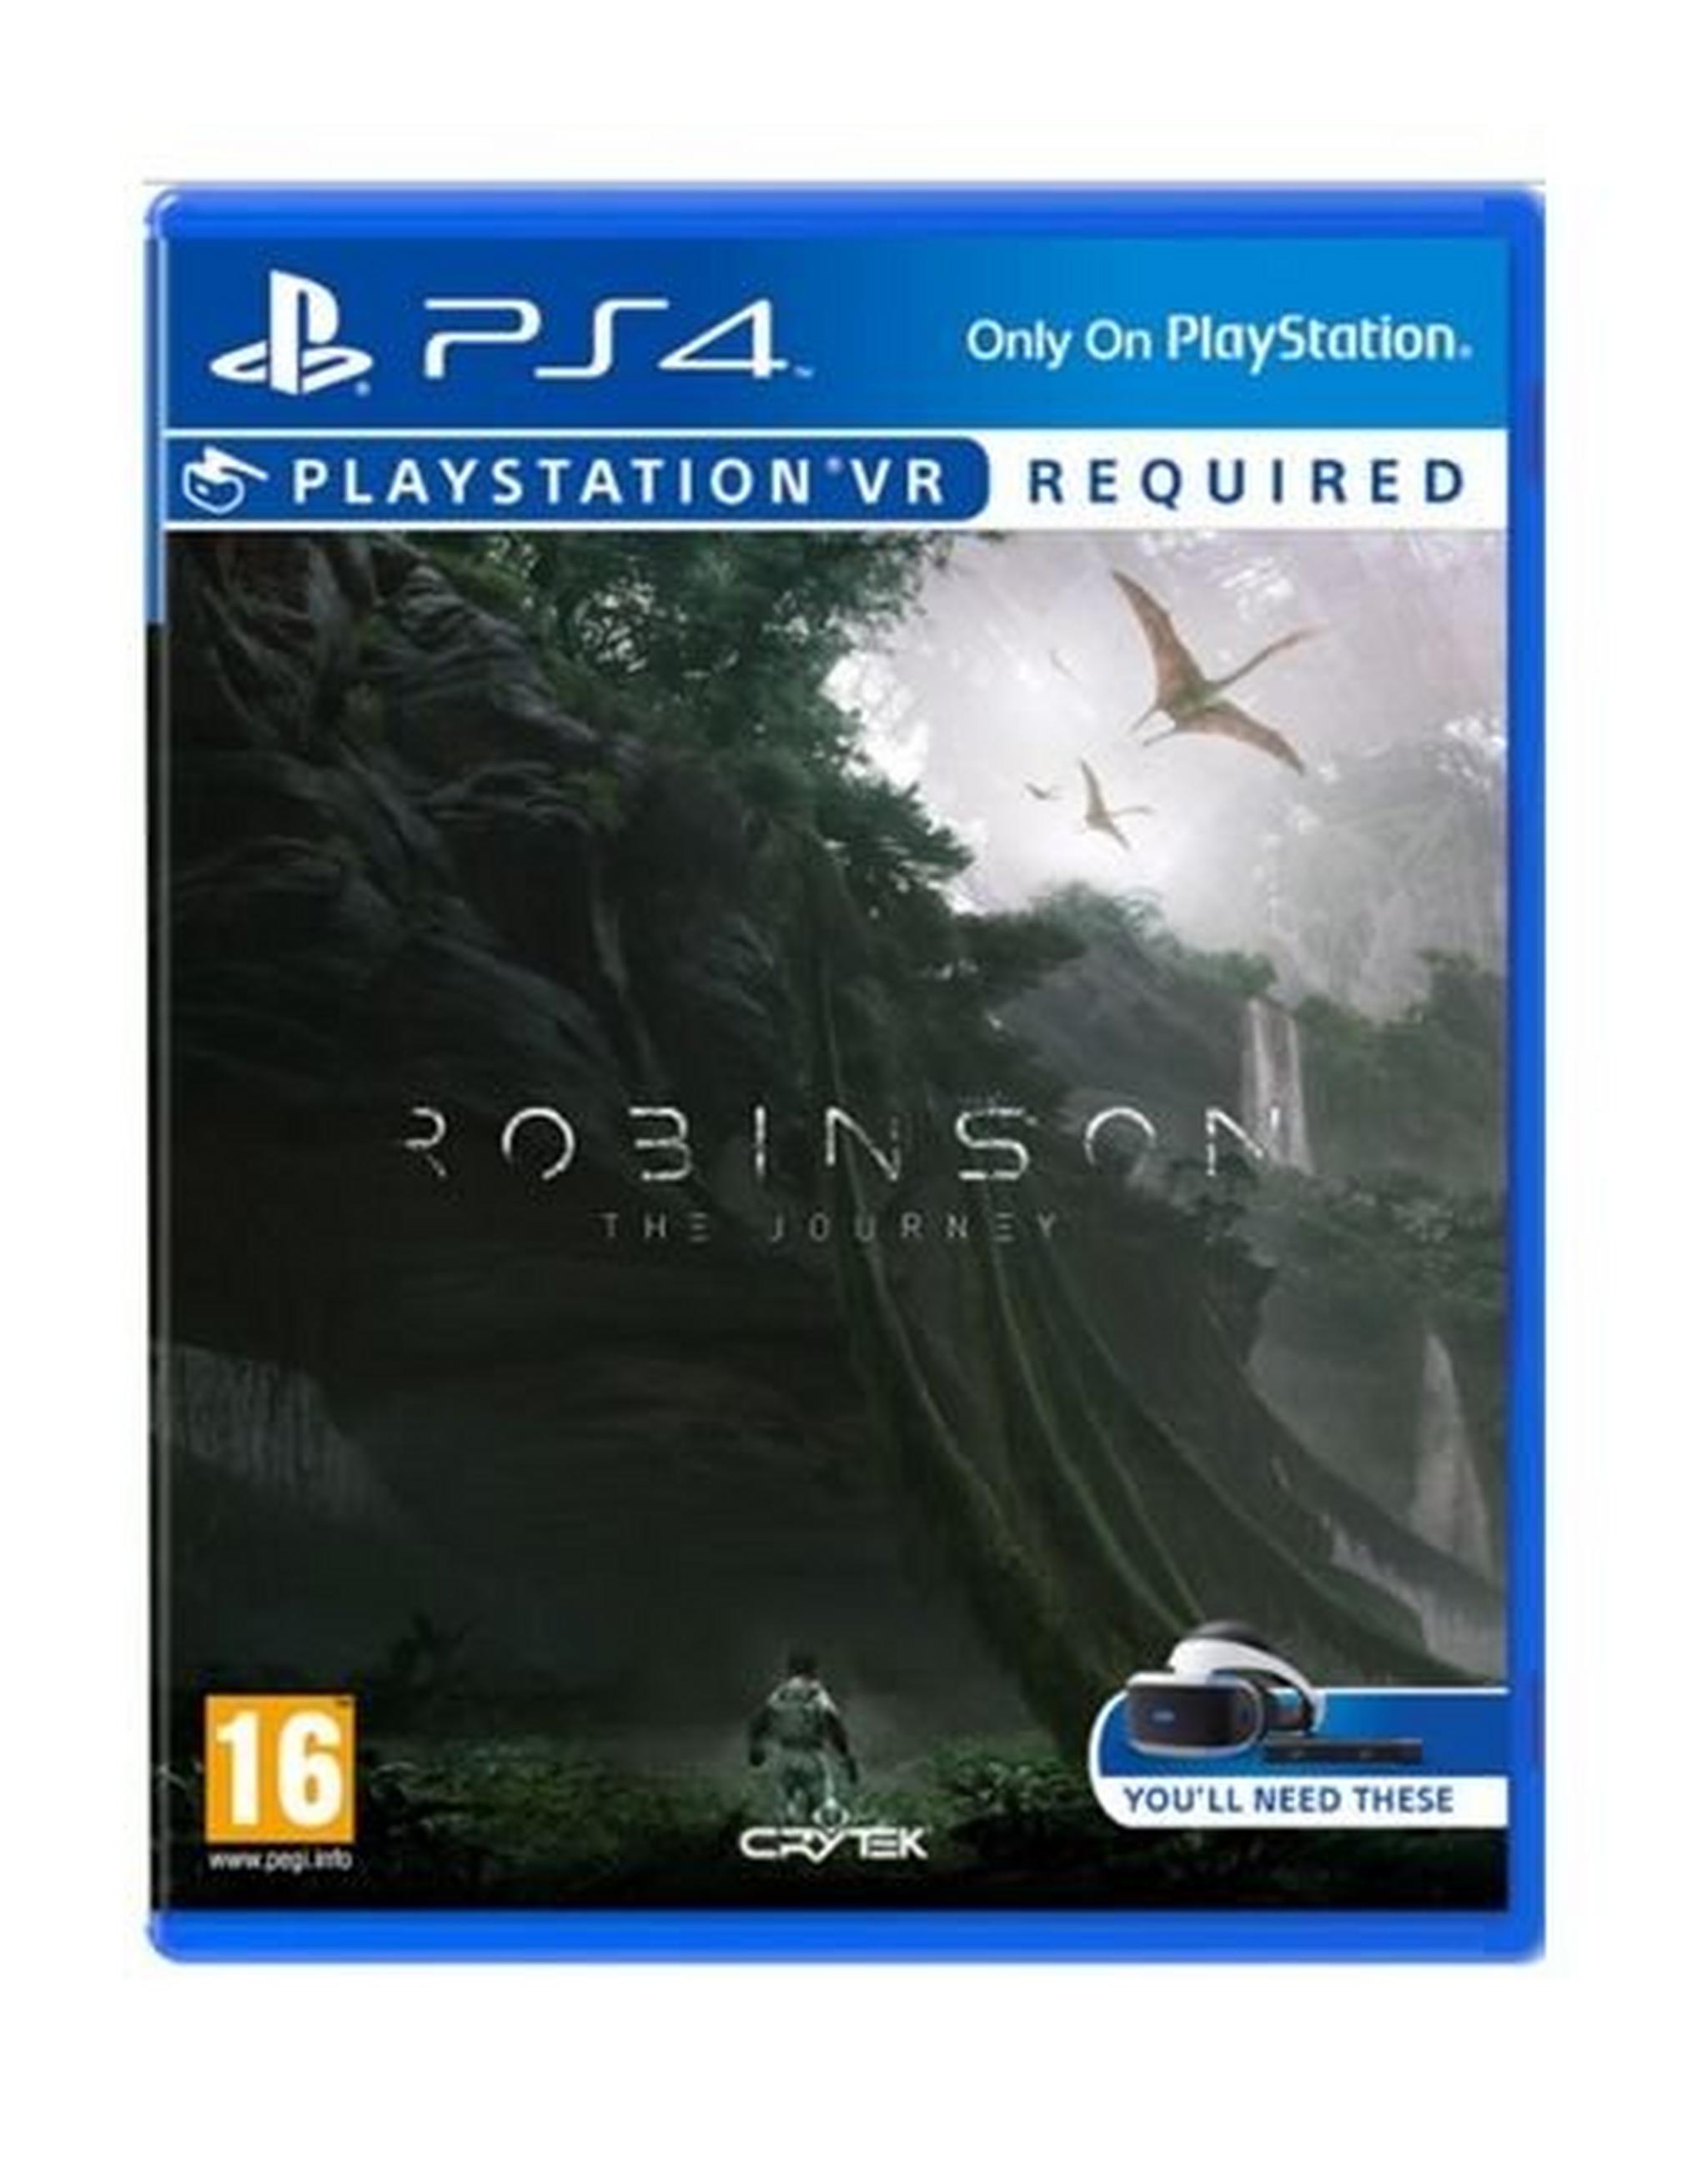 Robinson: The Journey – Playstation 4 VR Game